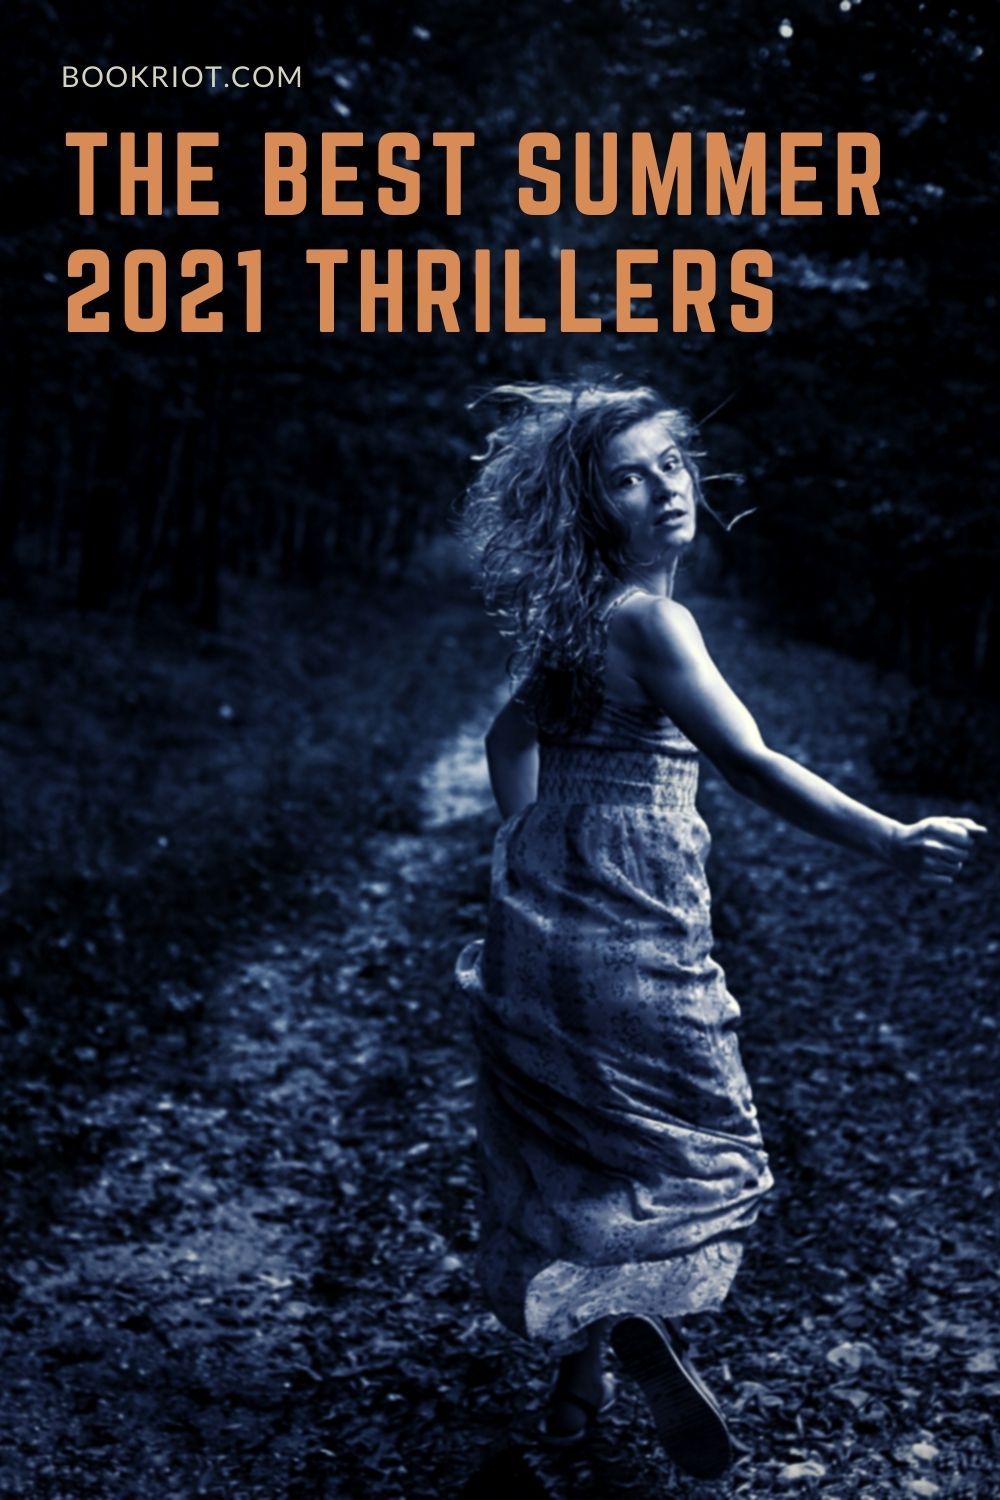 9 of the Best Summer 2021 Thrillers Book Riot